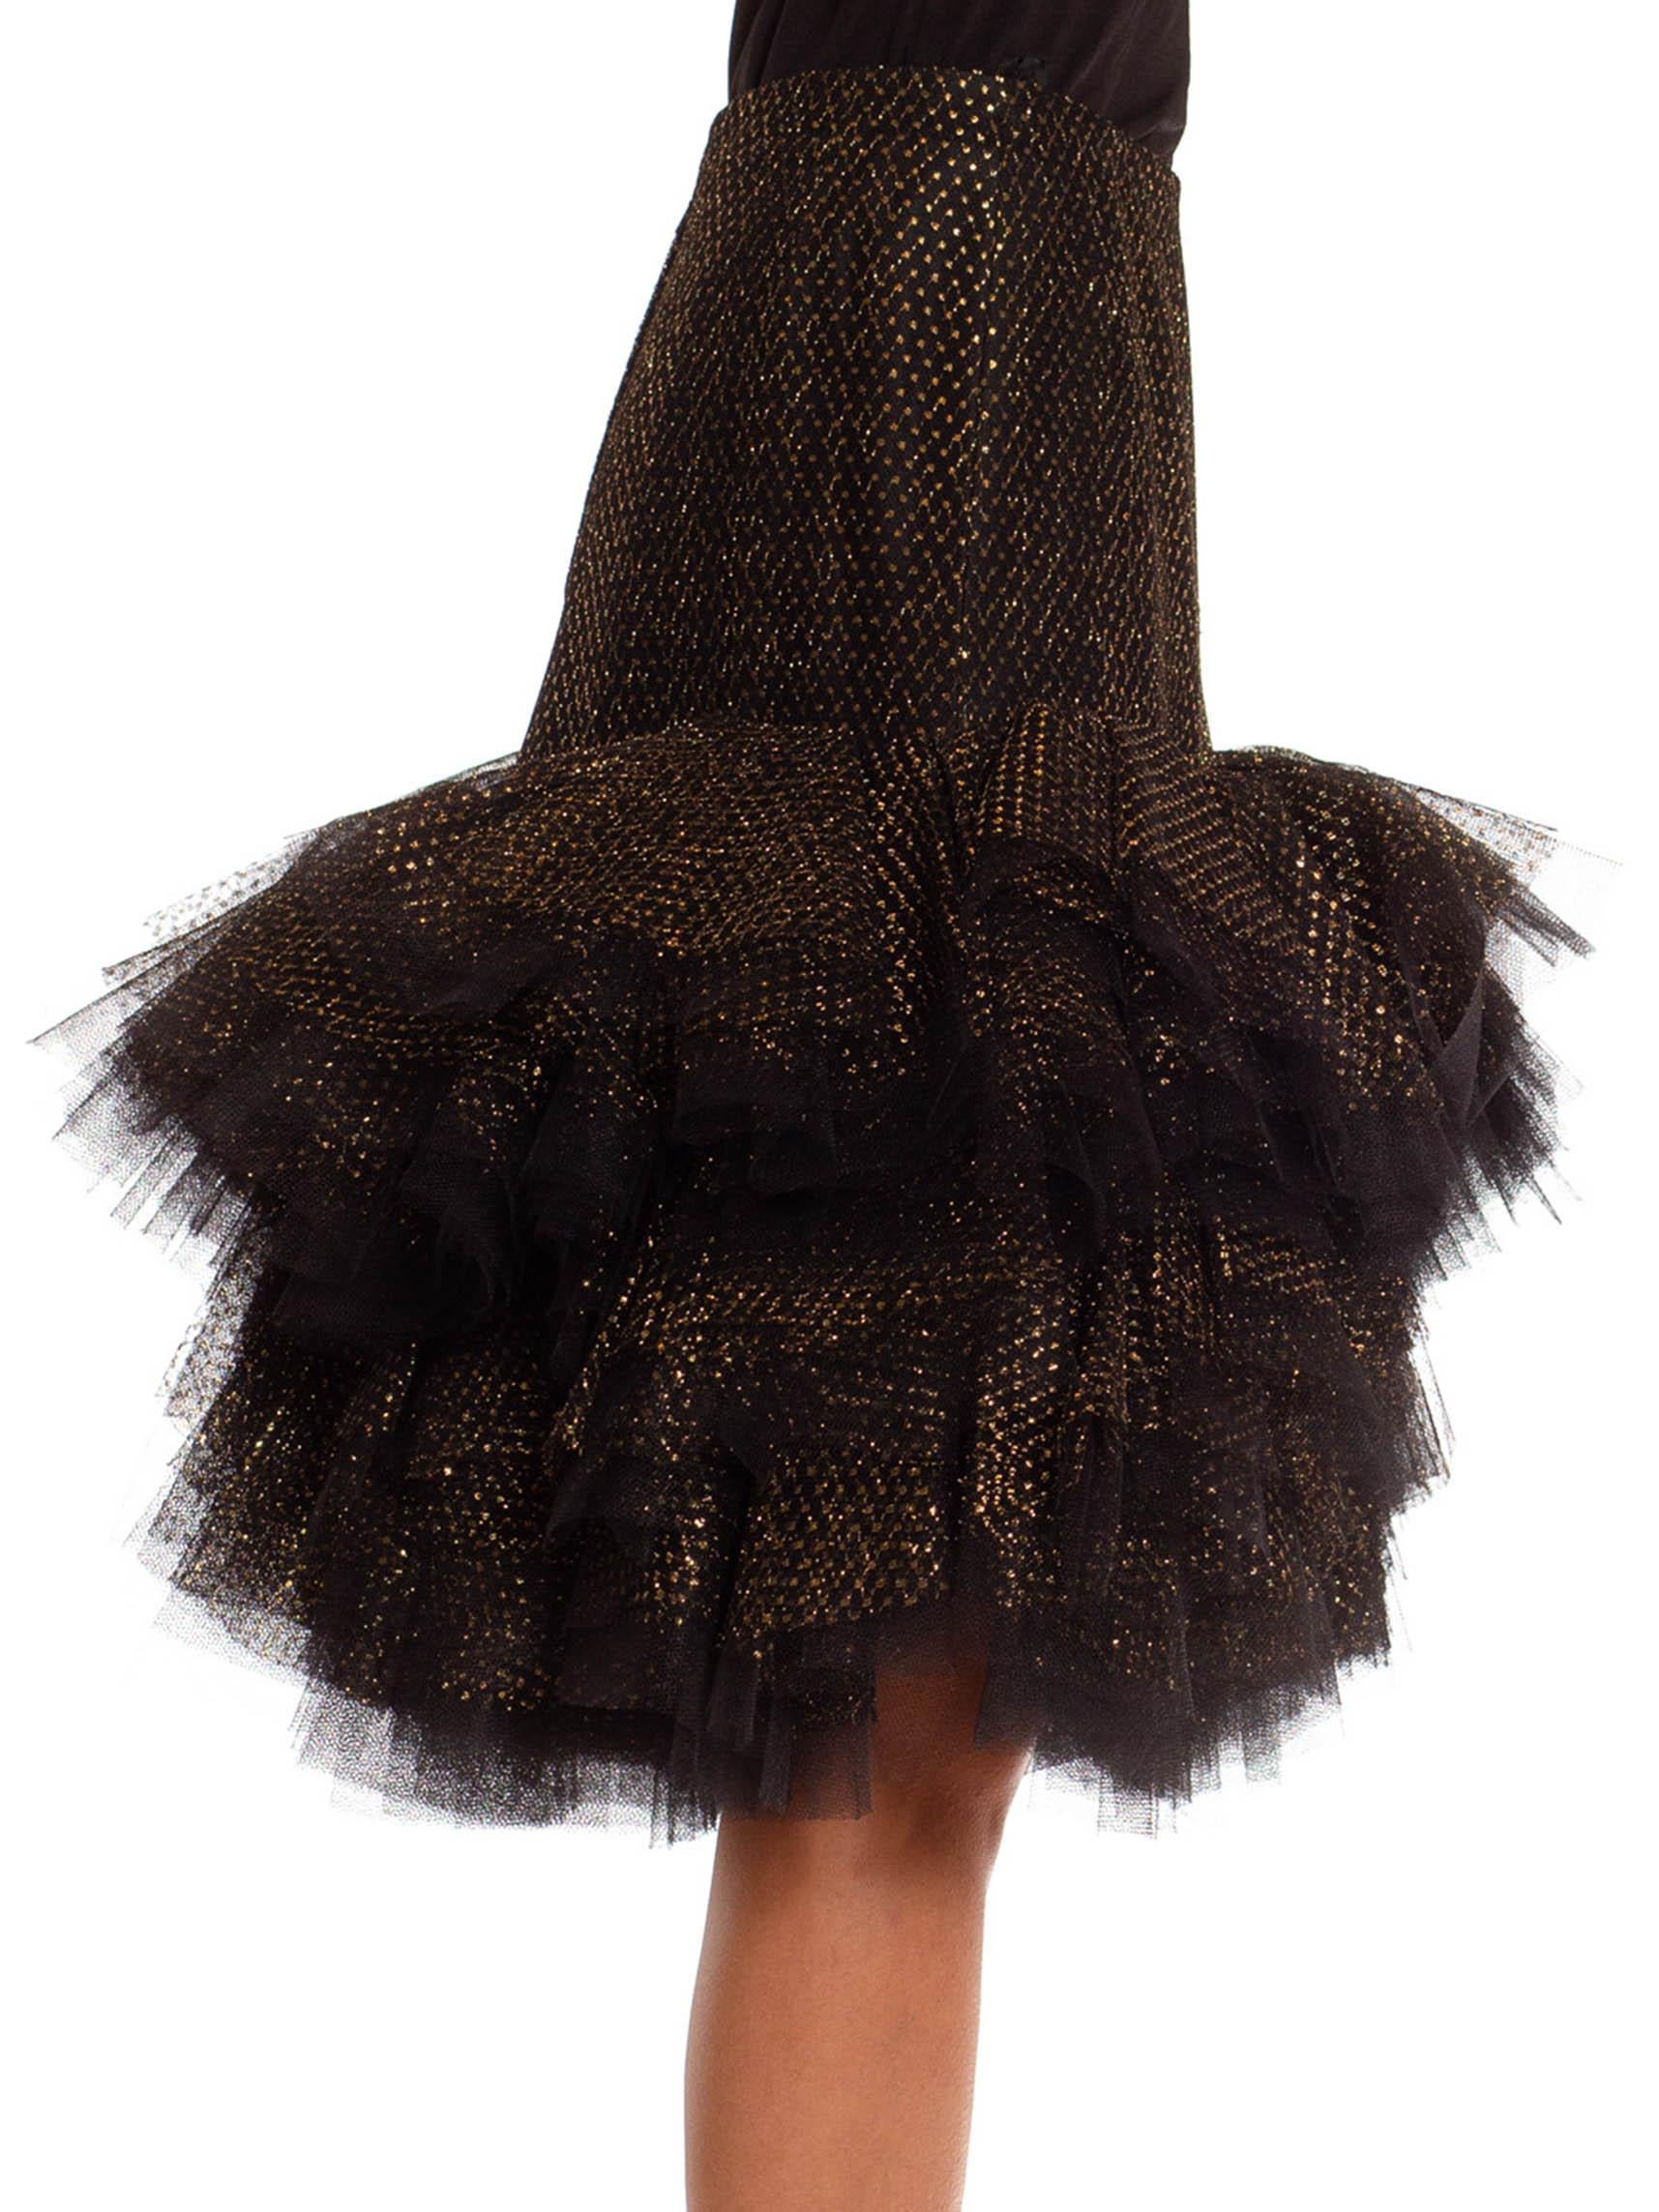 1980S Jacqueline De Ribes Black & Gold Tulle Tiered Polka Dot Skirt In Excellent Condition For Sale In New York, NY